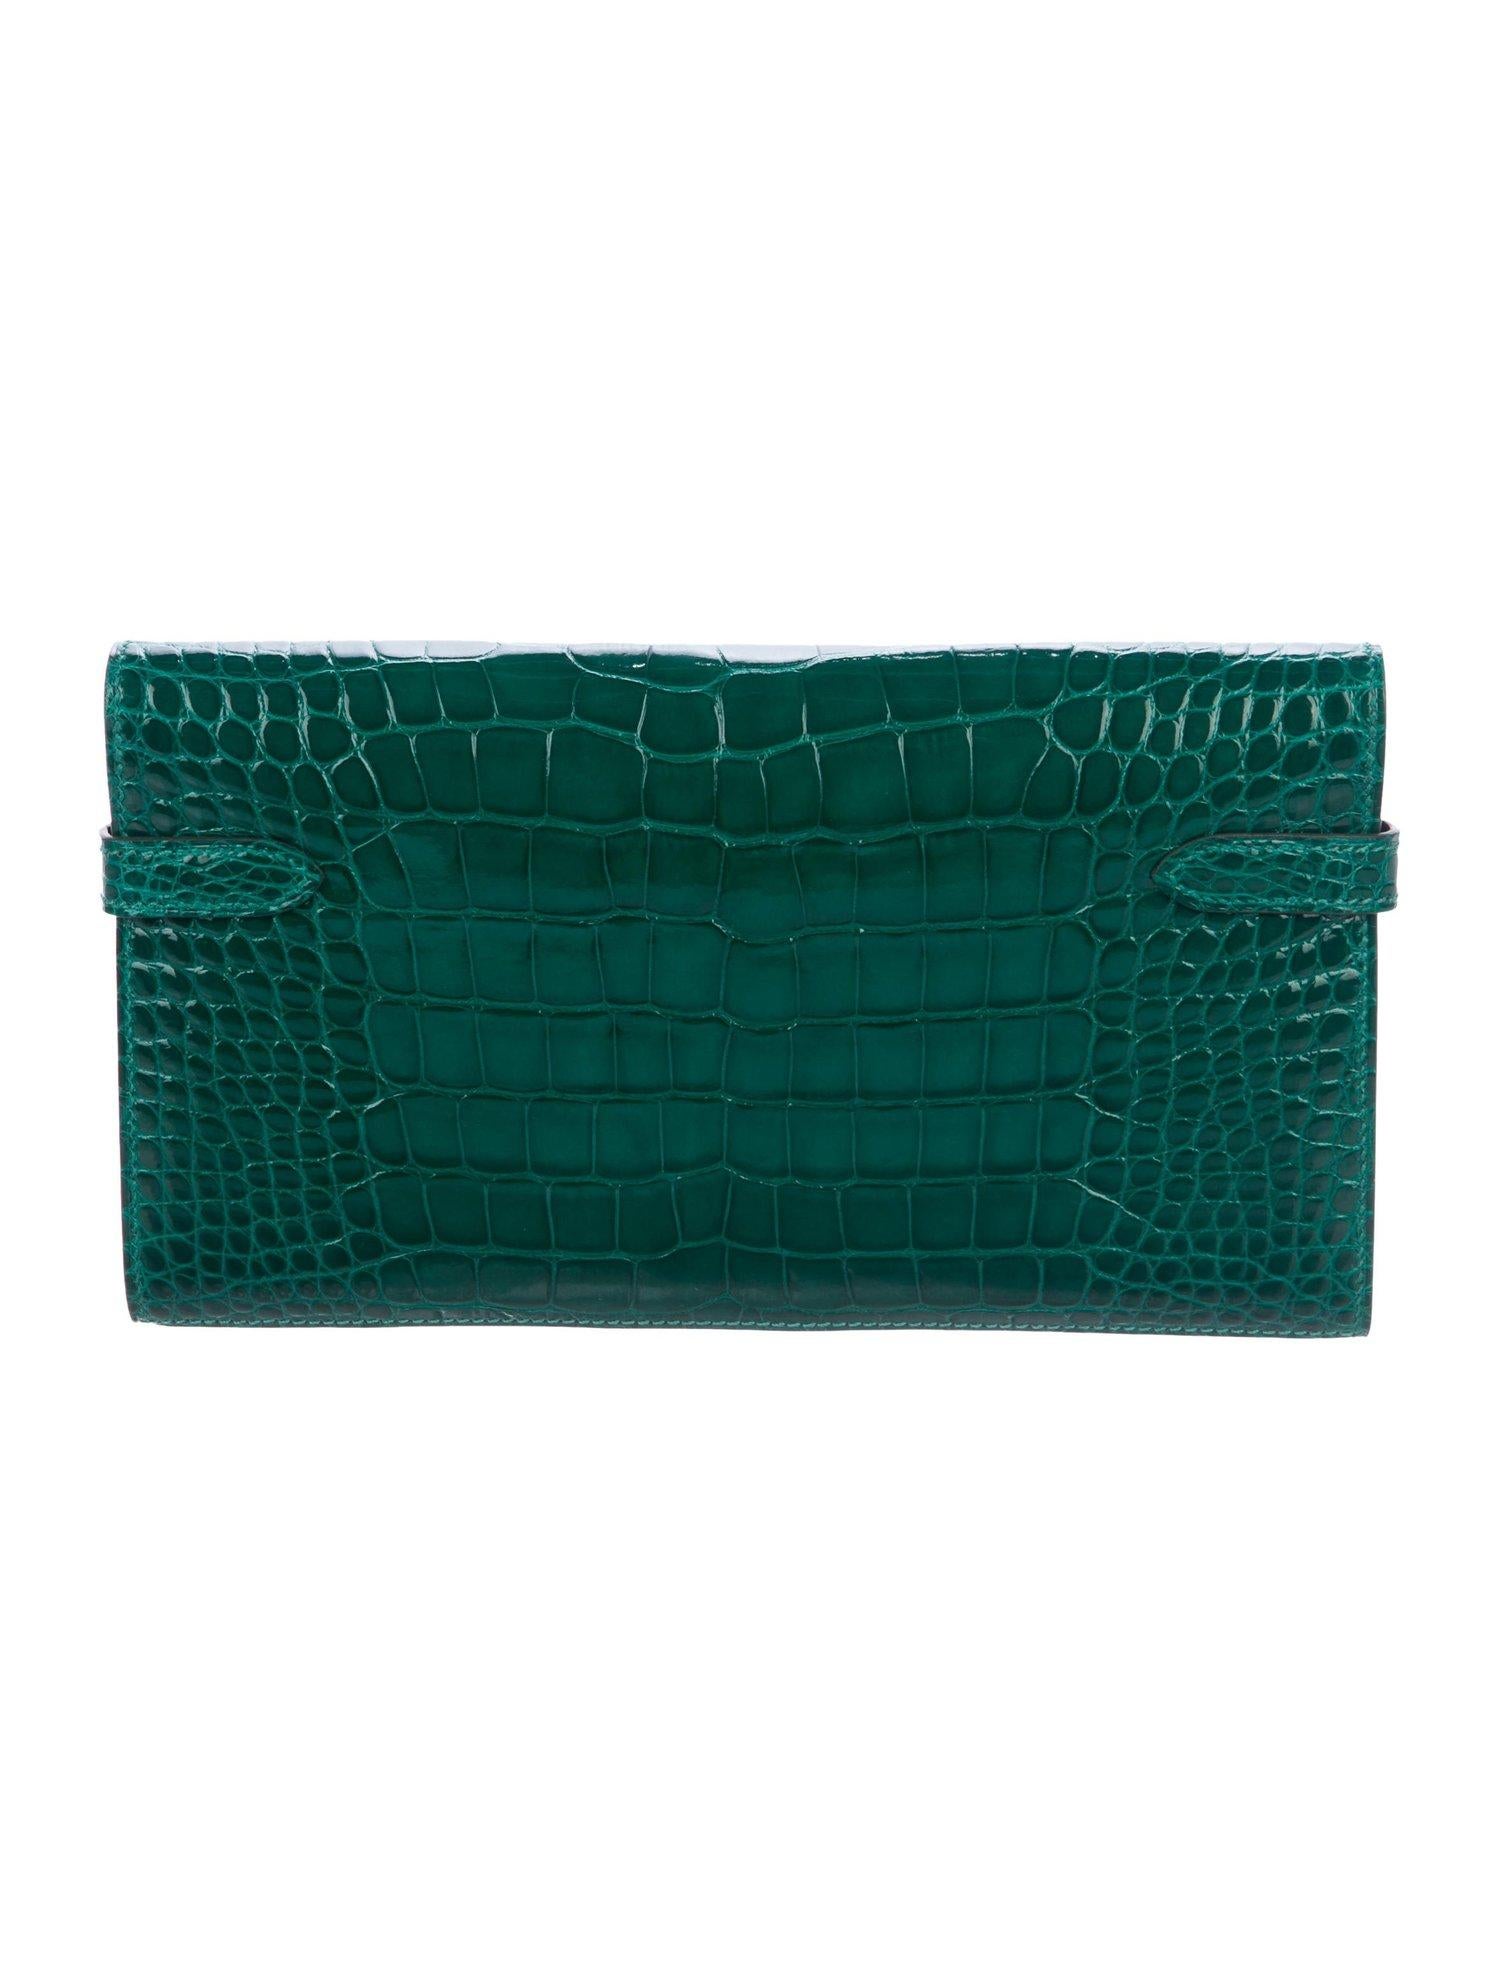 Hermes Kelly Green Alligator Gold Evening Kelly Clutch Wallet Bag in Box

Alligator 
Gold tone hardware
Turnlock closure
Leather lining
Date code present
Made in France
Features zip closure, bill compartment and 12 card slots 
Measures 7.75